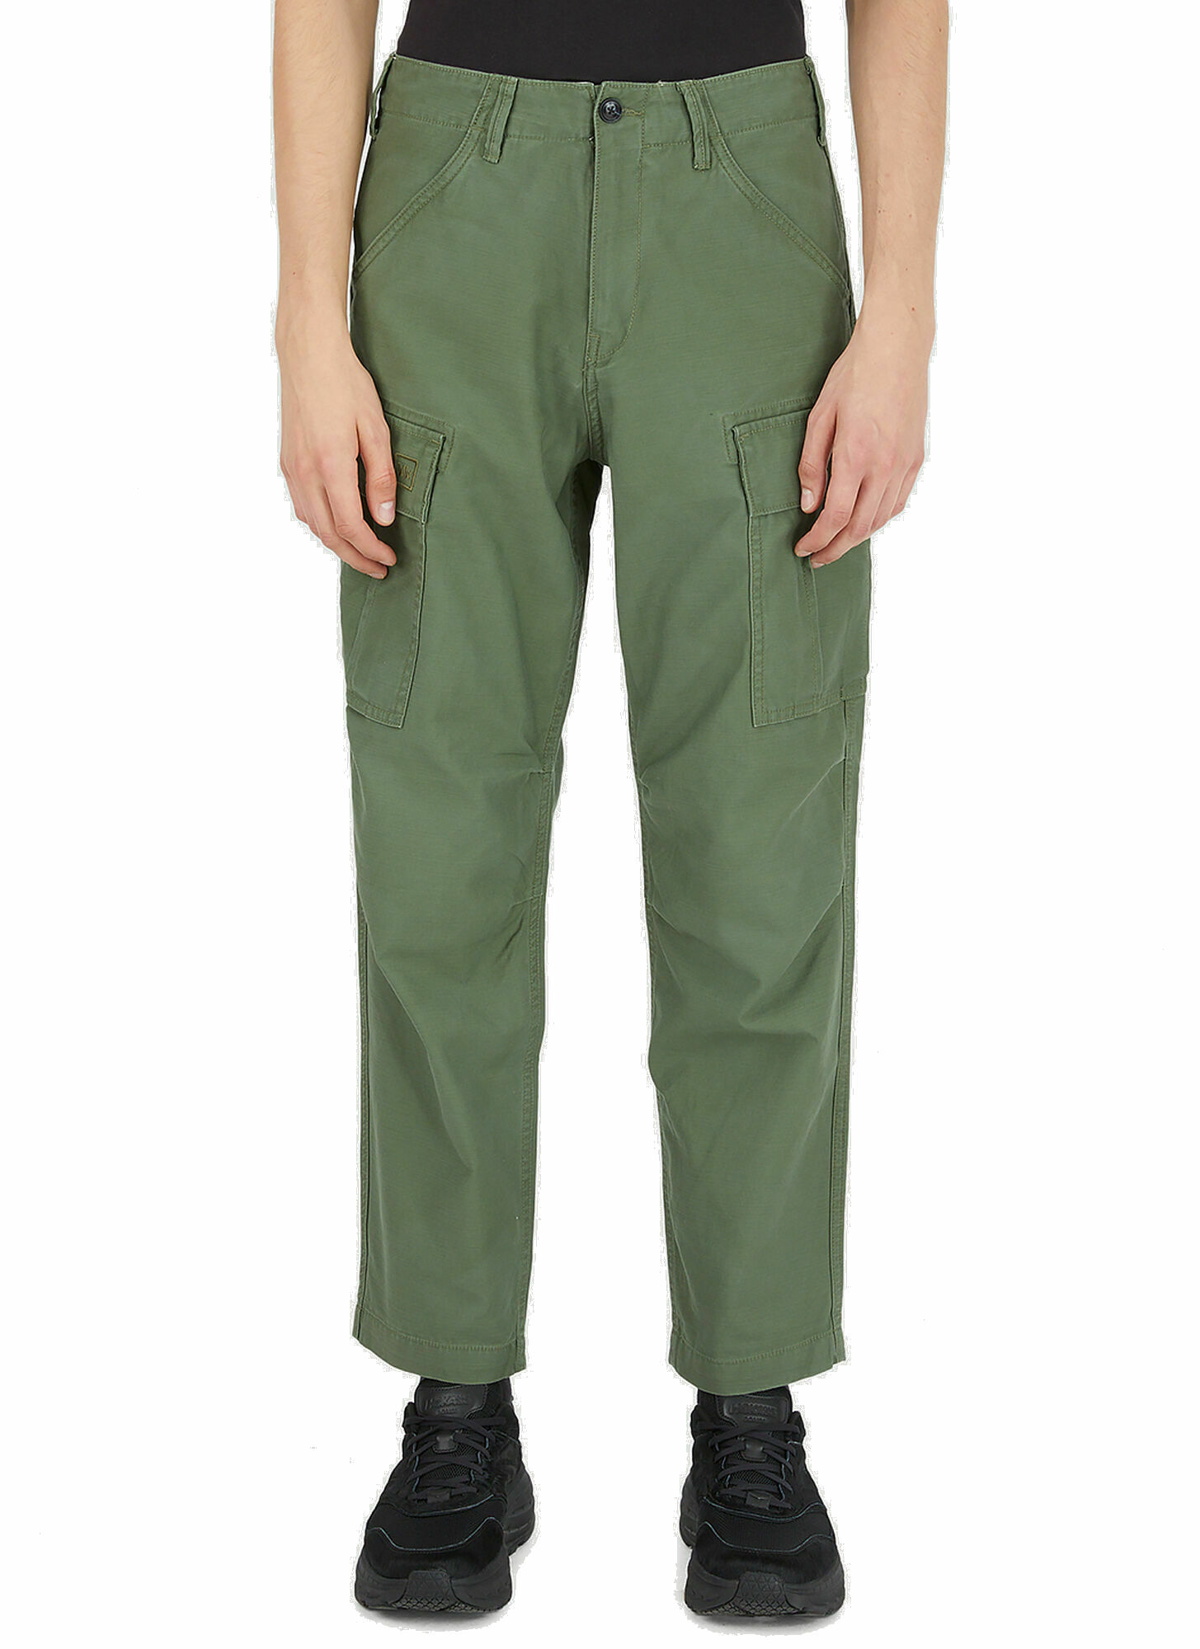 Six Pocket Army Pants in Green Liberaiders